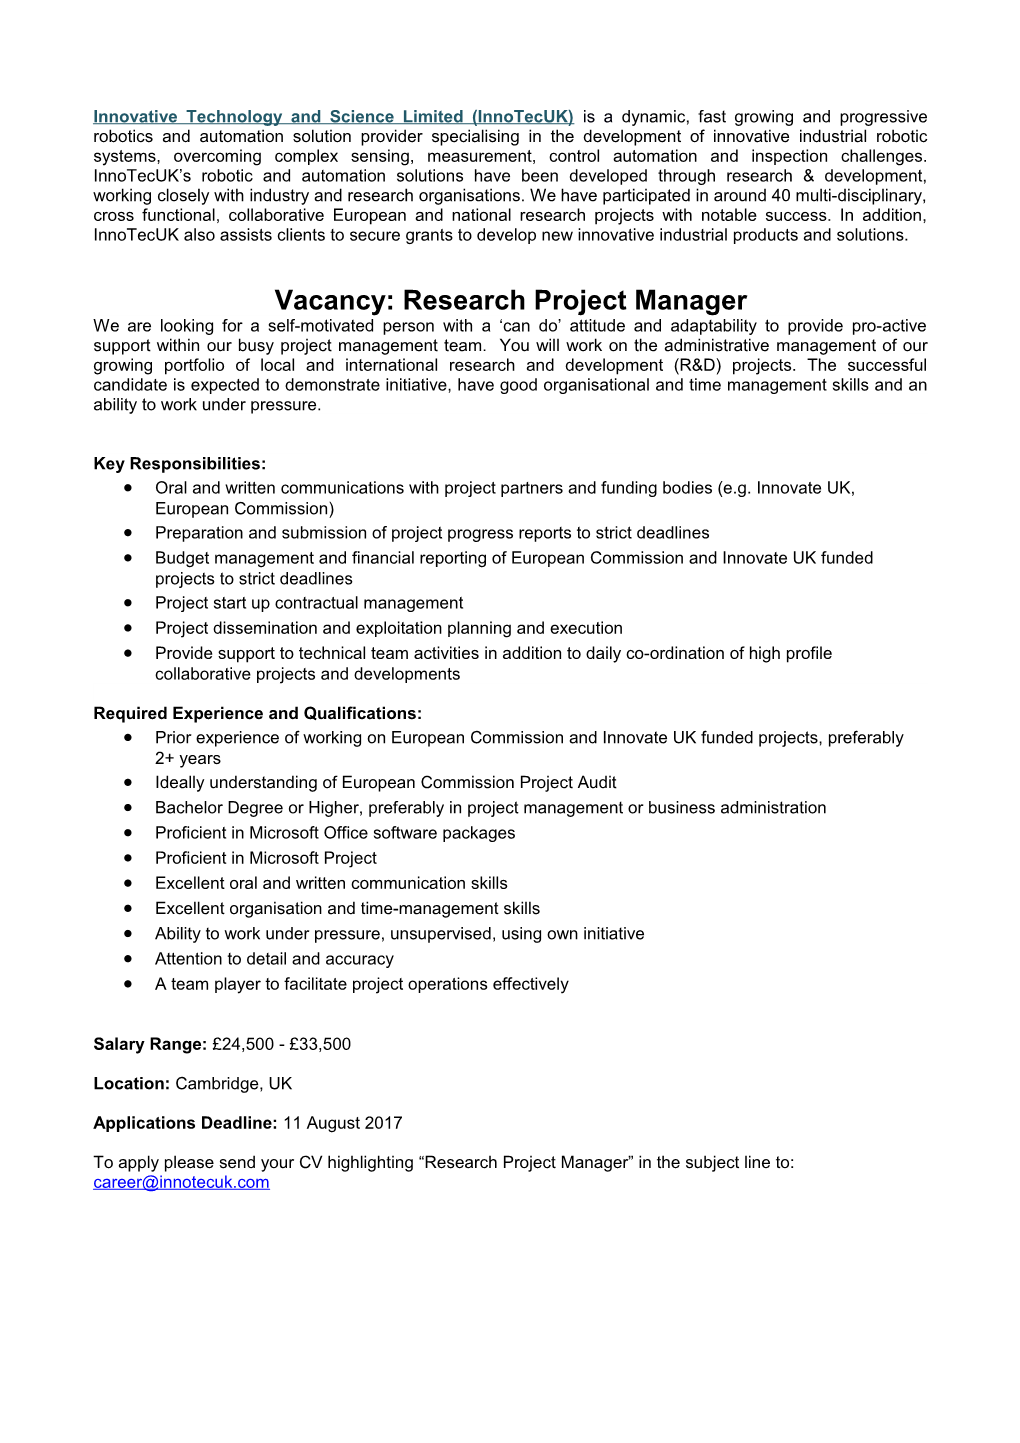 Vacancy: Research Project Manager